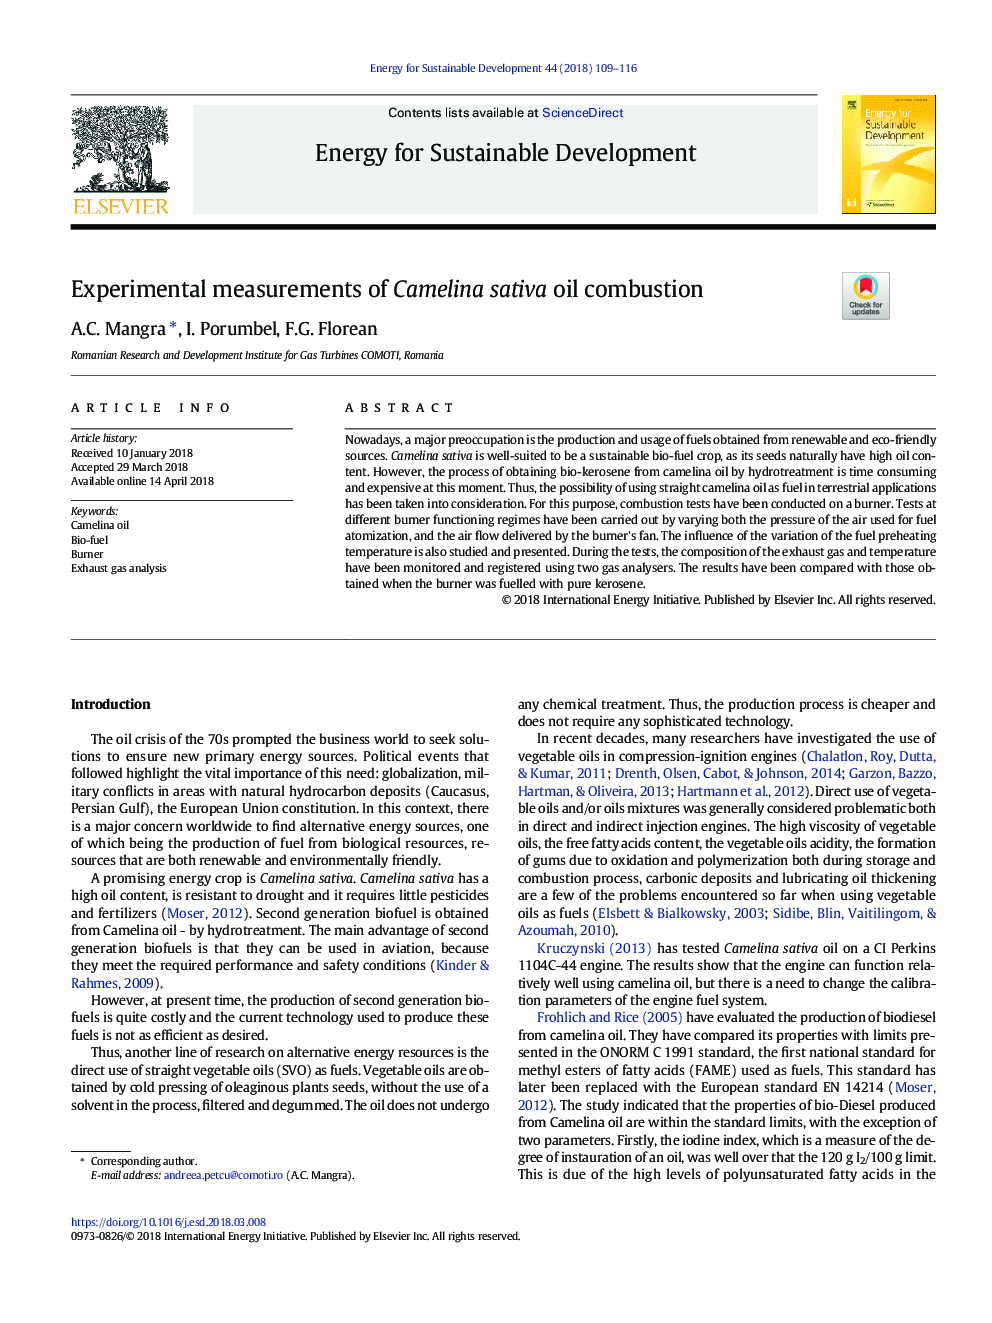 Experimental measurements of Camelina sativa oil combustion